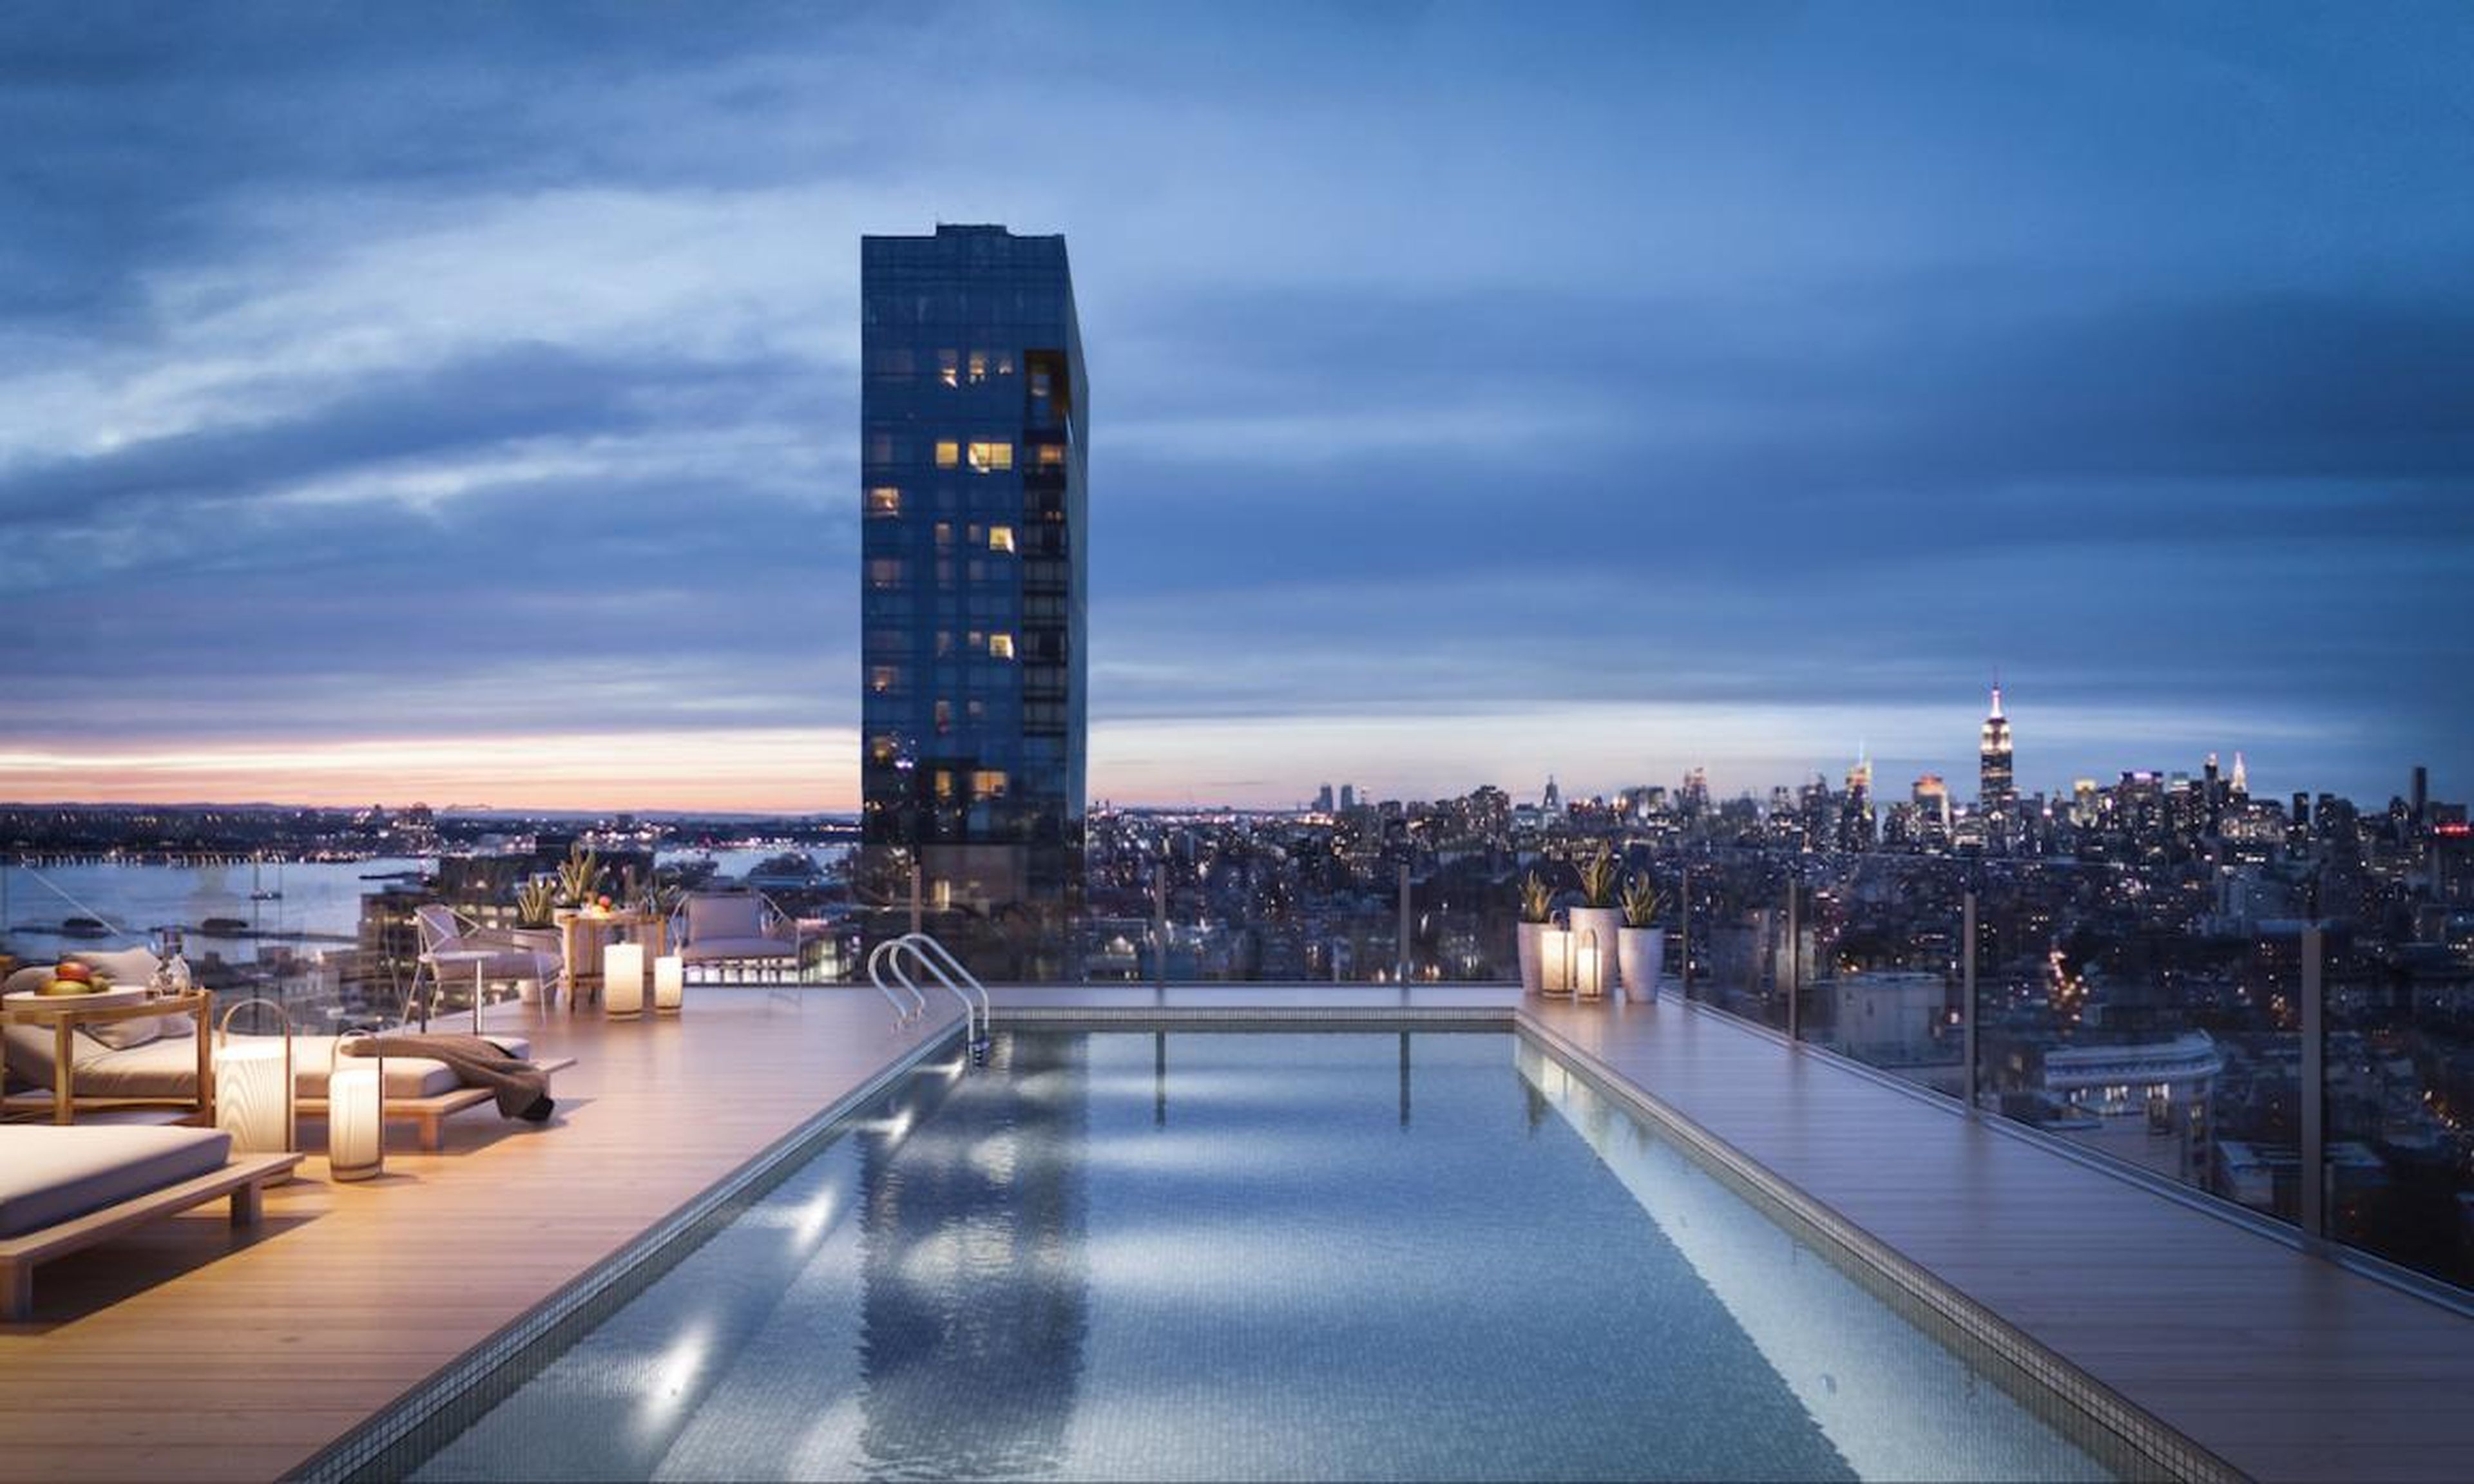 From the pool, Kalanick and his guests will have sweeping views of Manhattan and the Hudson River from their perch just above the entrance to the Holland Tunnel.